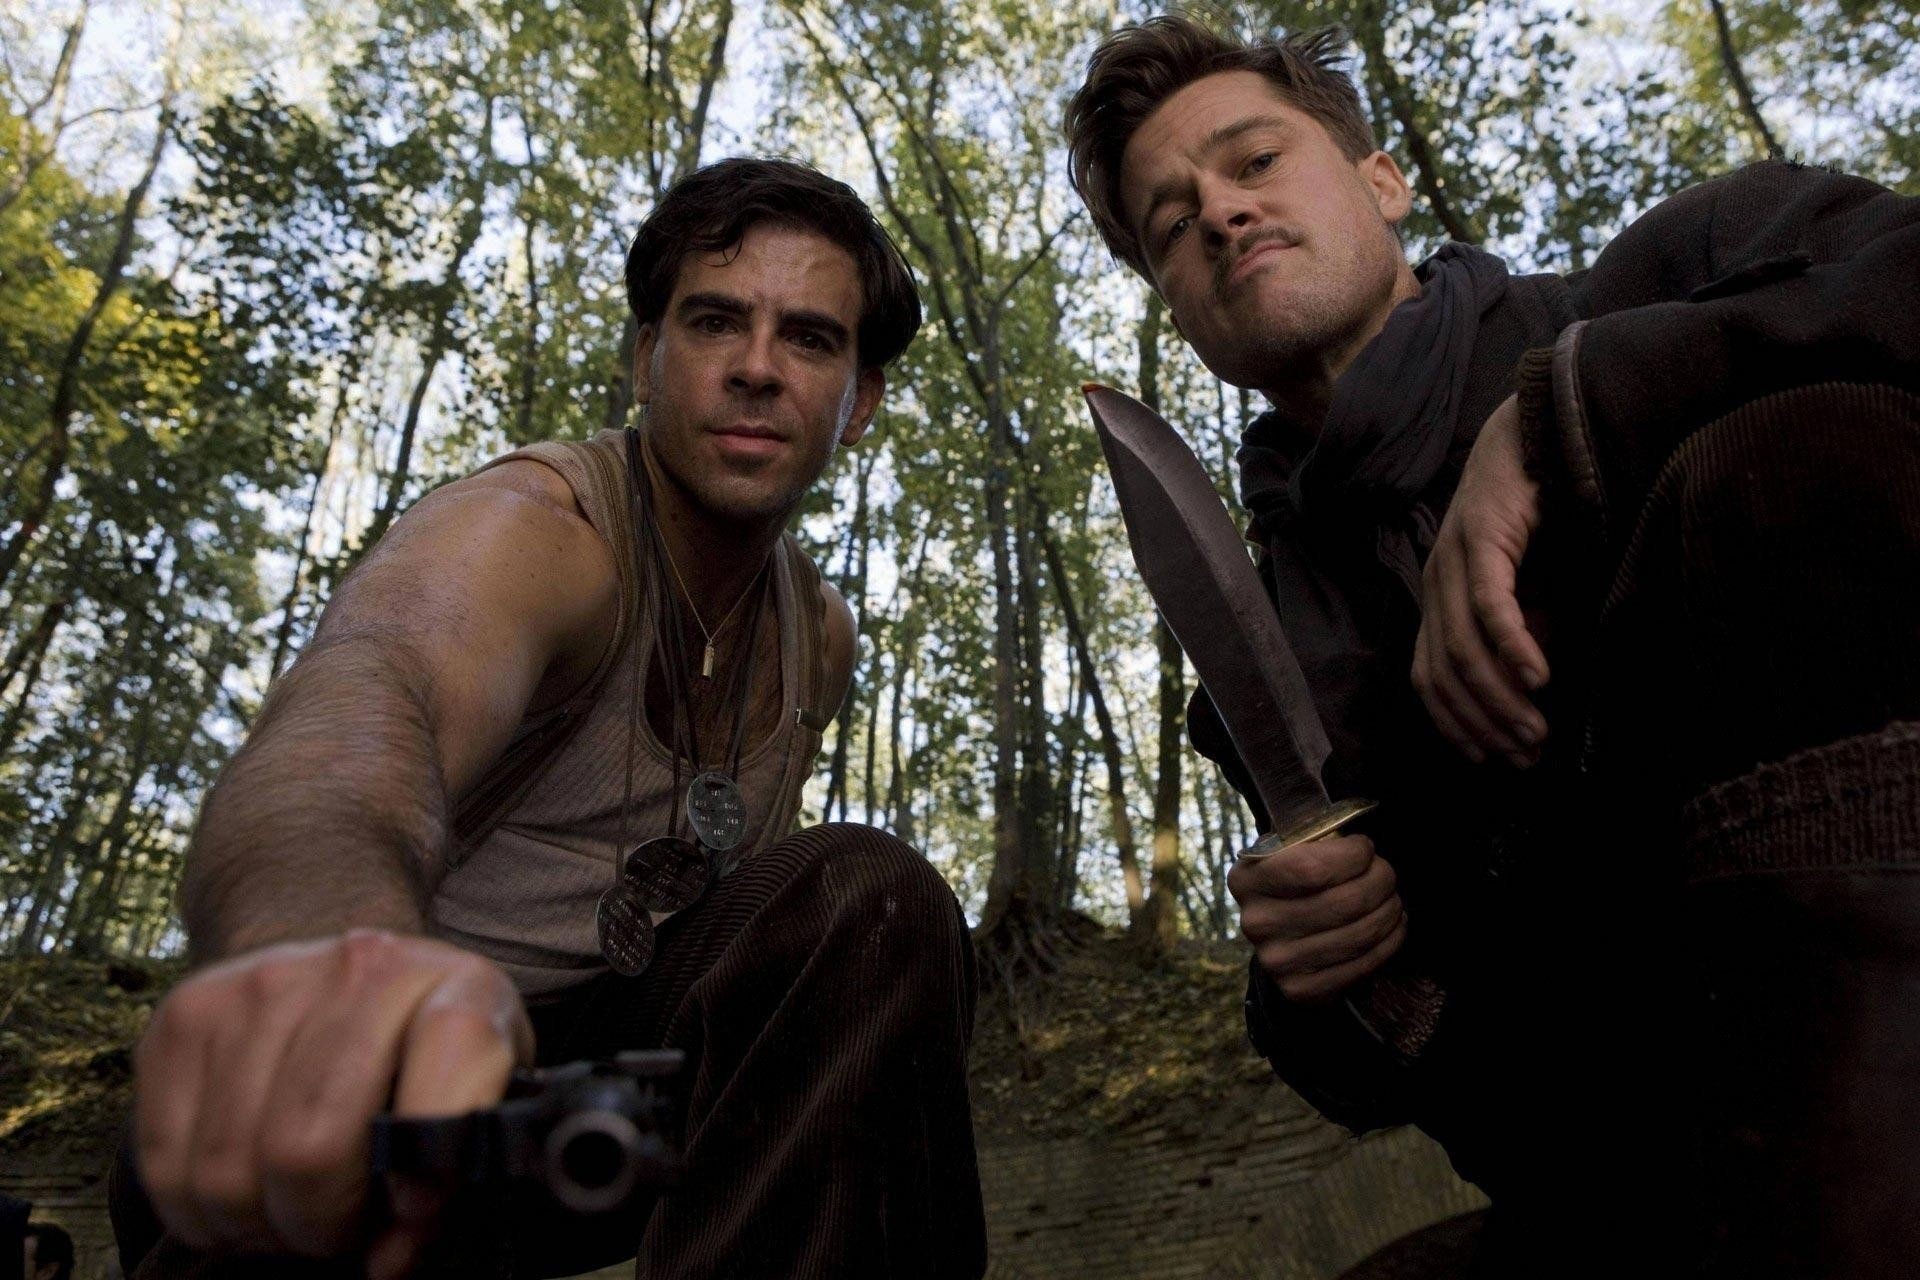 Two men in the woods holding guns